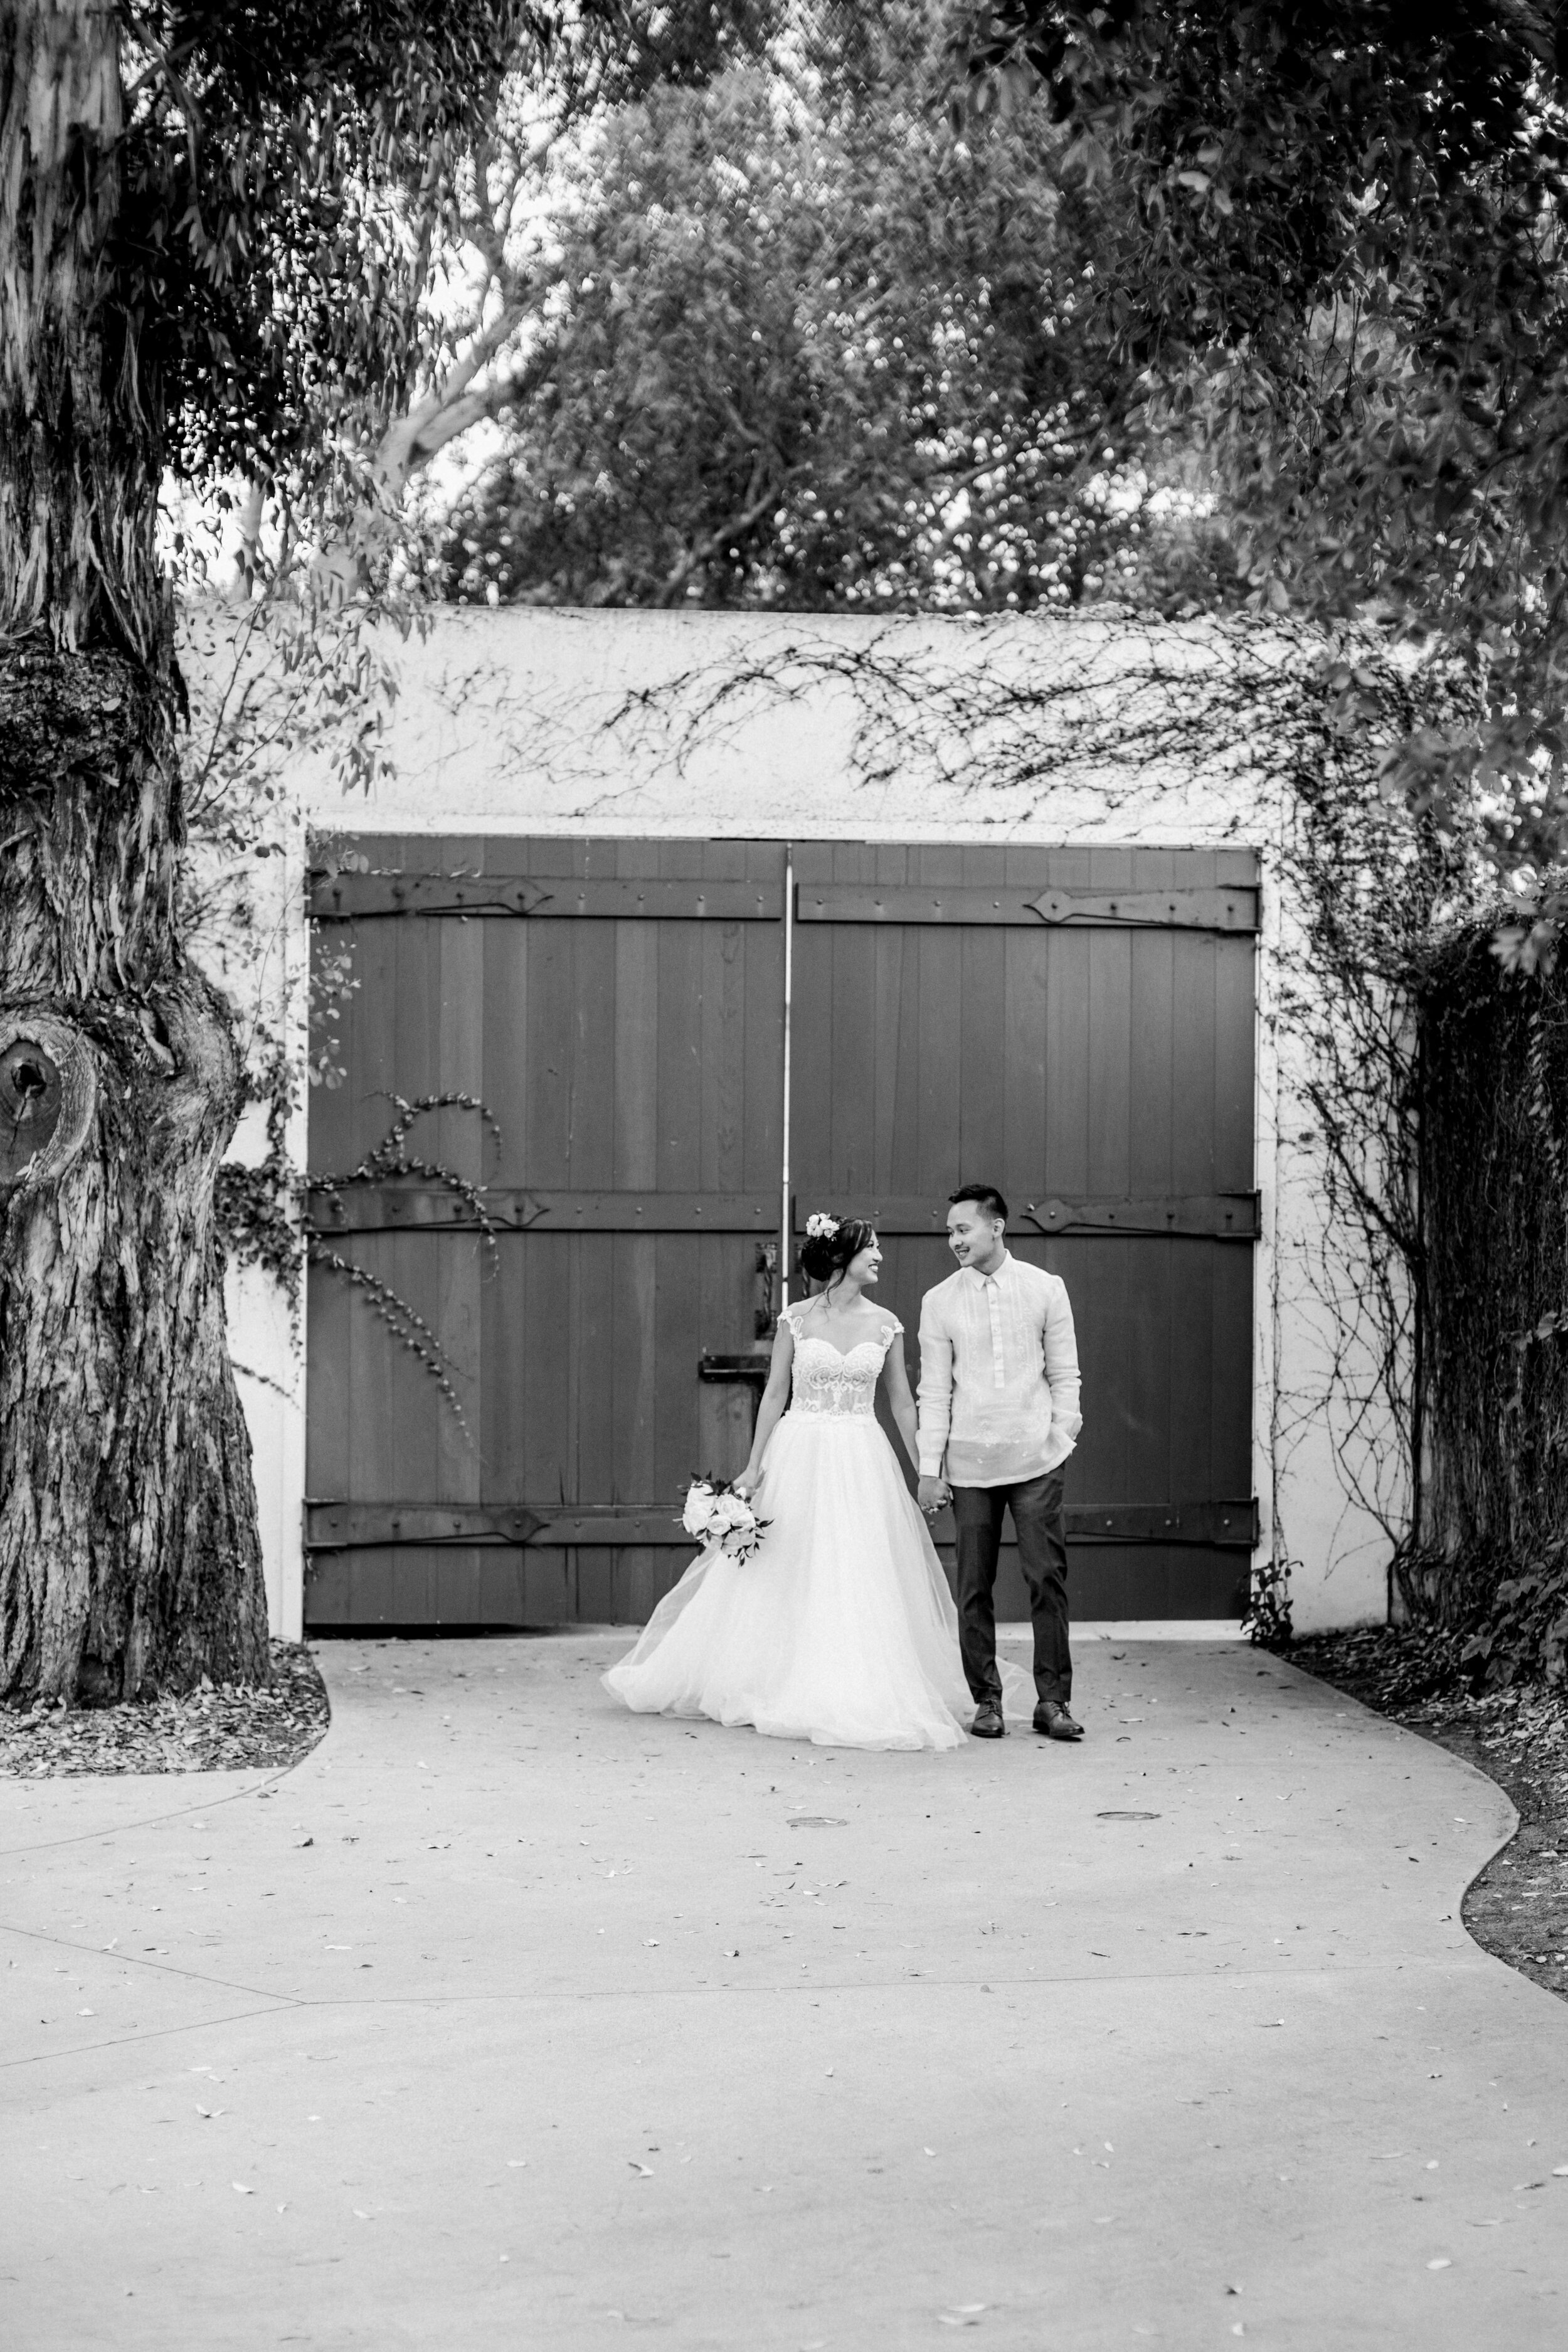 www.santabarbarawedding.com | Events by Fran | Chase Palm Park | Anna Delores Photography | Tangled Lotus | Pineapple Industries | Mila Bridal | Joel Sebastian | Couple in Front of Big Green Doors